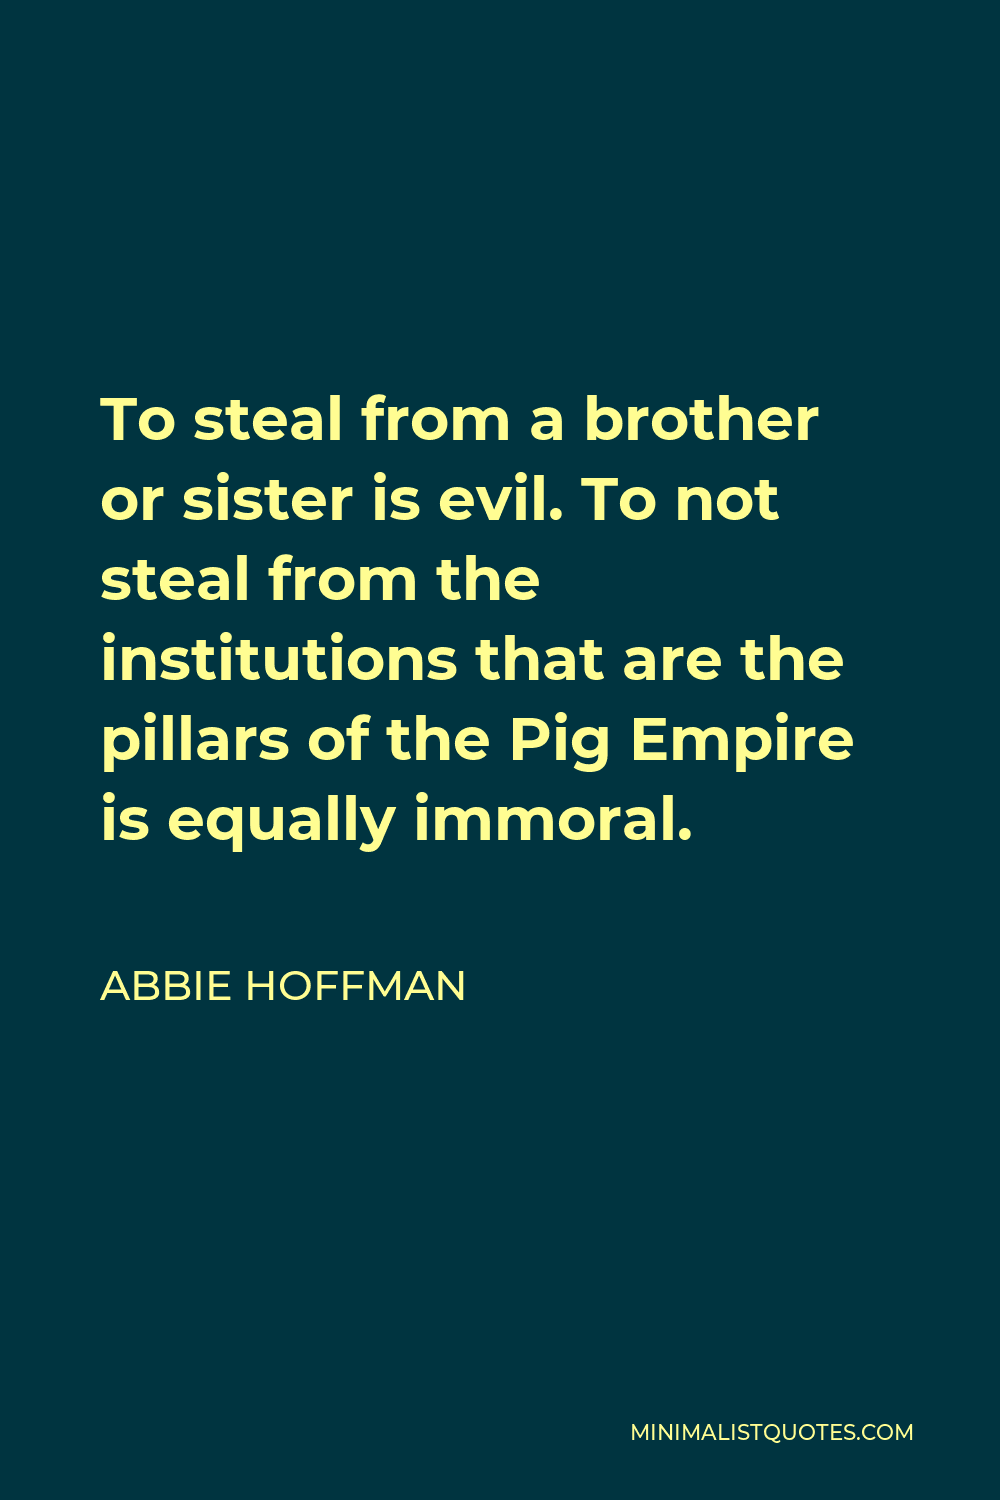 Abbie Hoffman Quote - To steal from a brother or sister is evil. To not steal from the institutions that are the pillars of the Pig Empire is equally immoral.